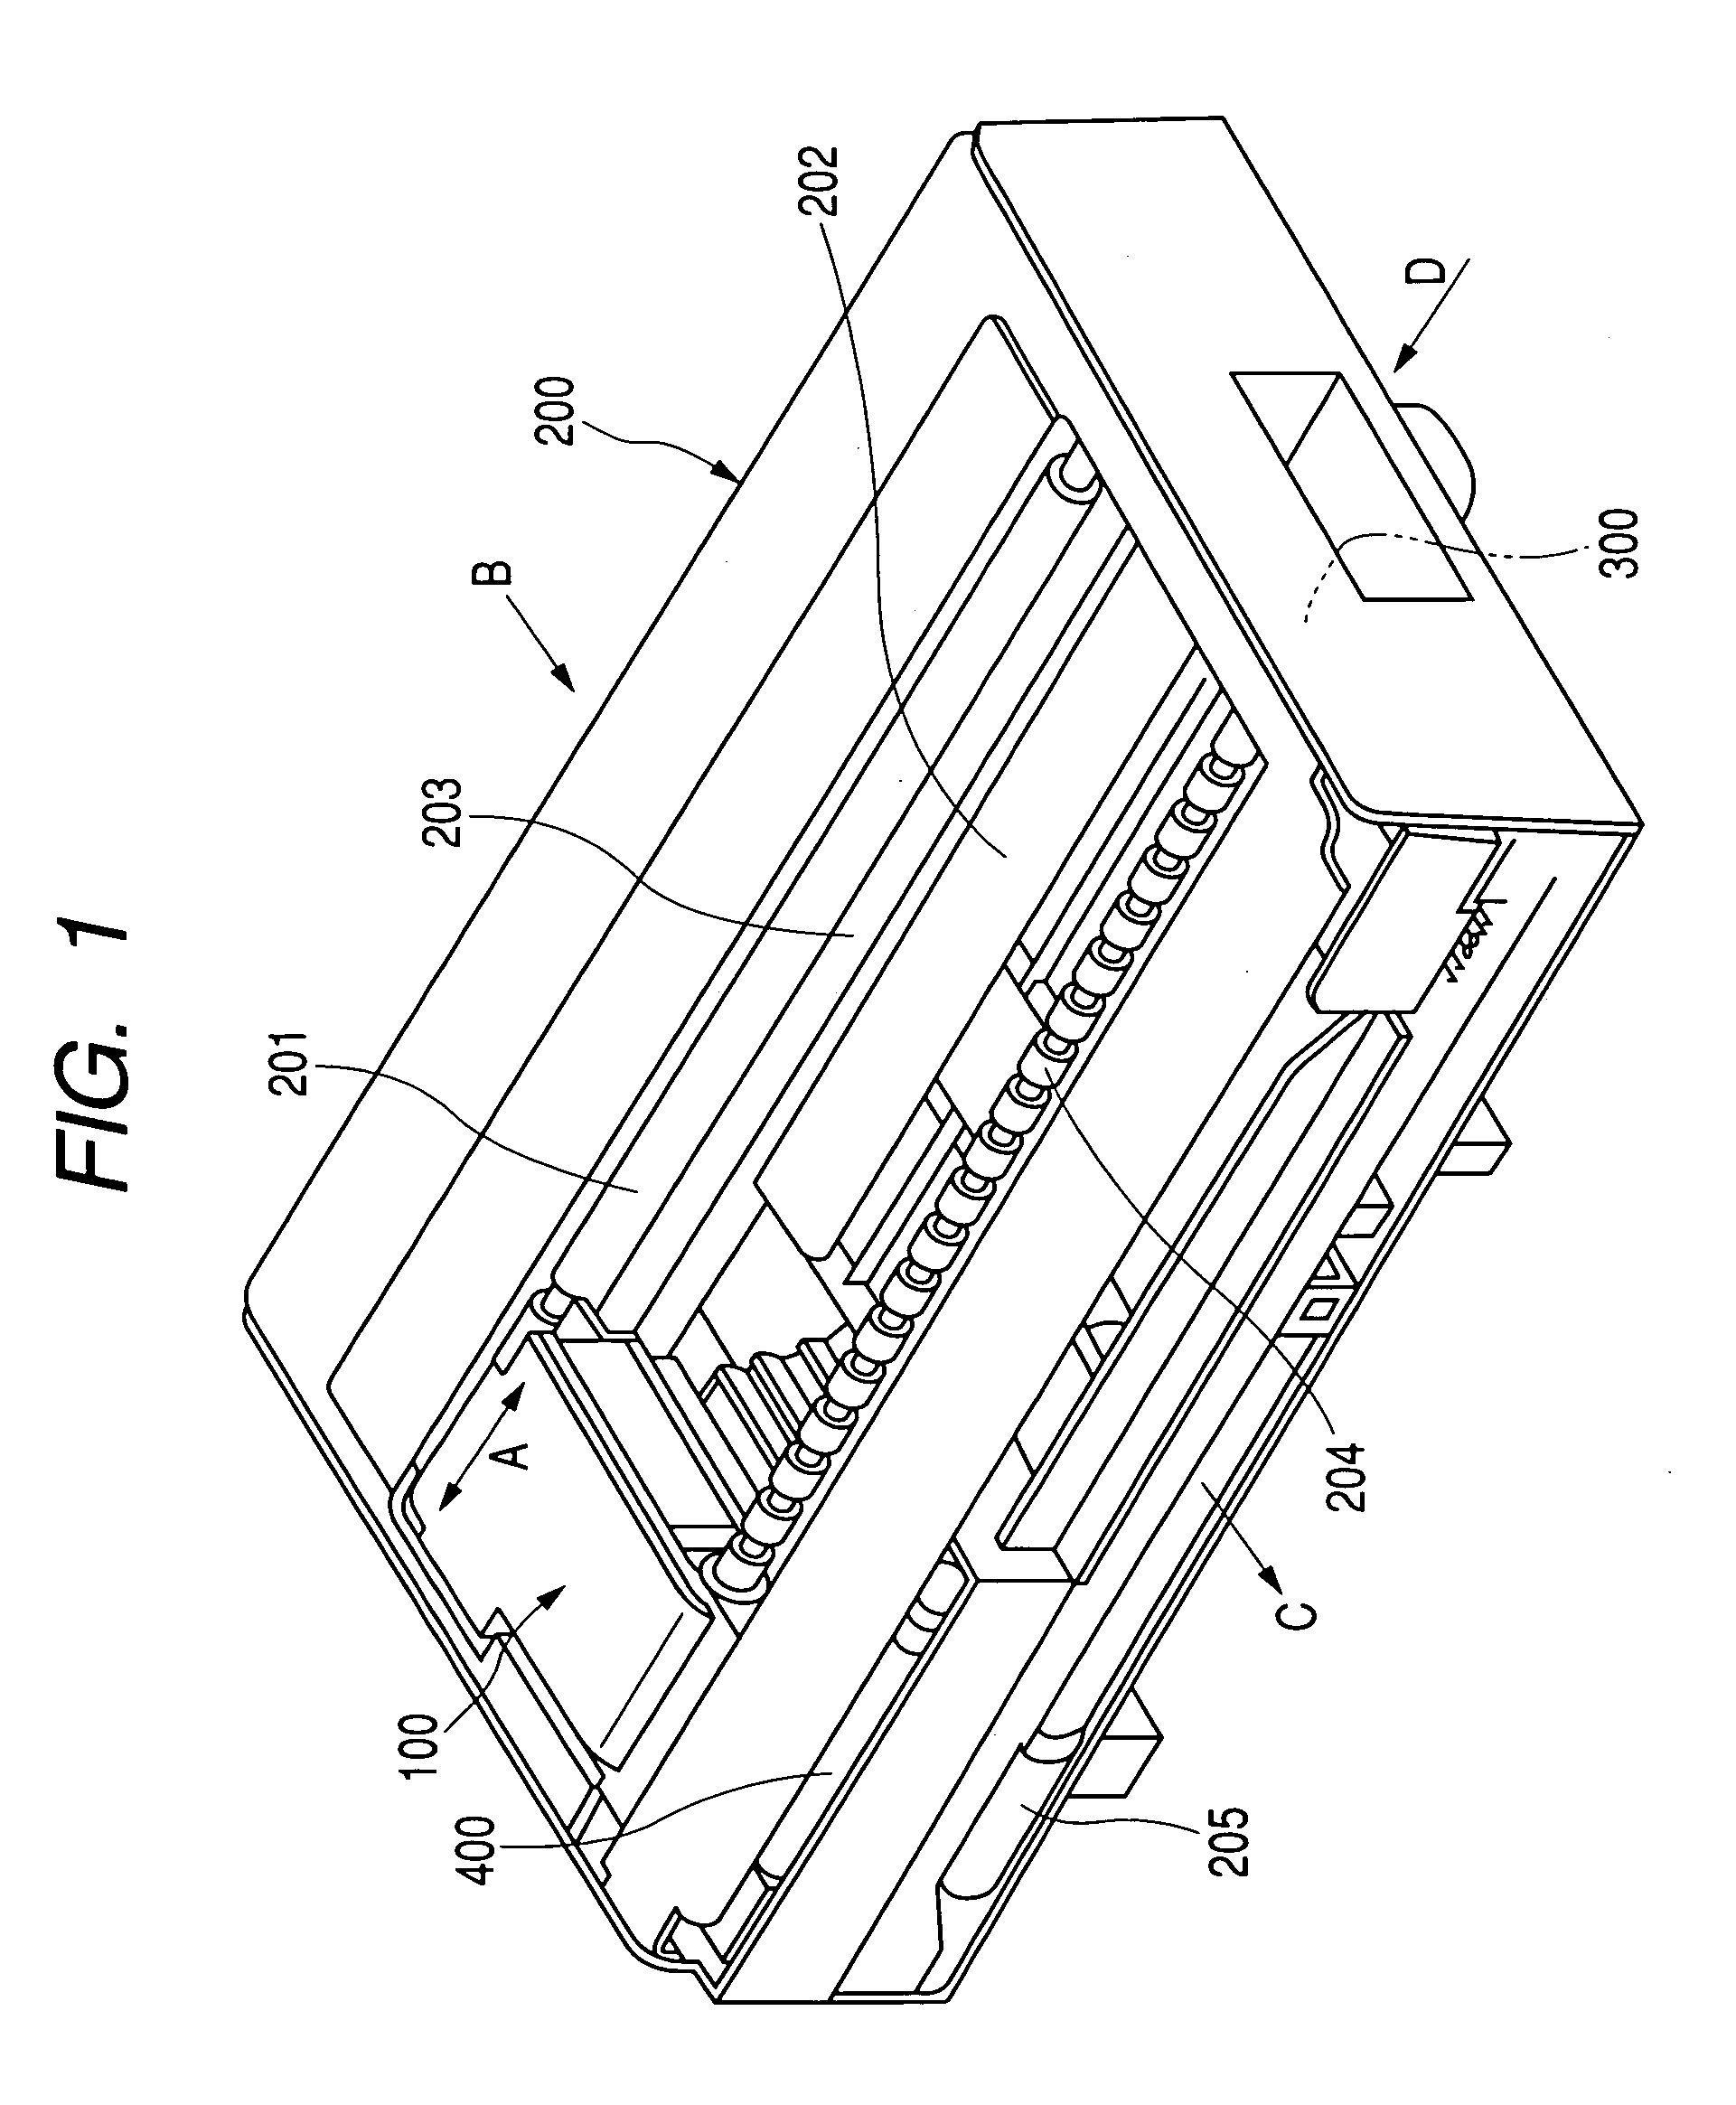 Ink jet recording apparatus and ink supply mechanism